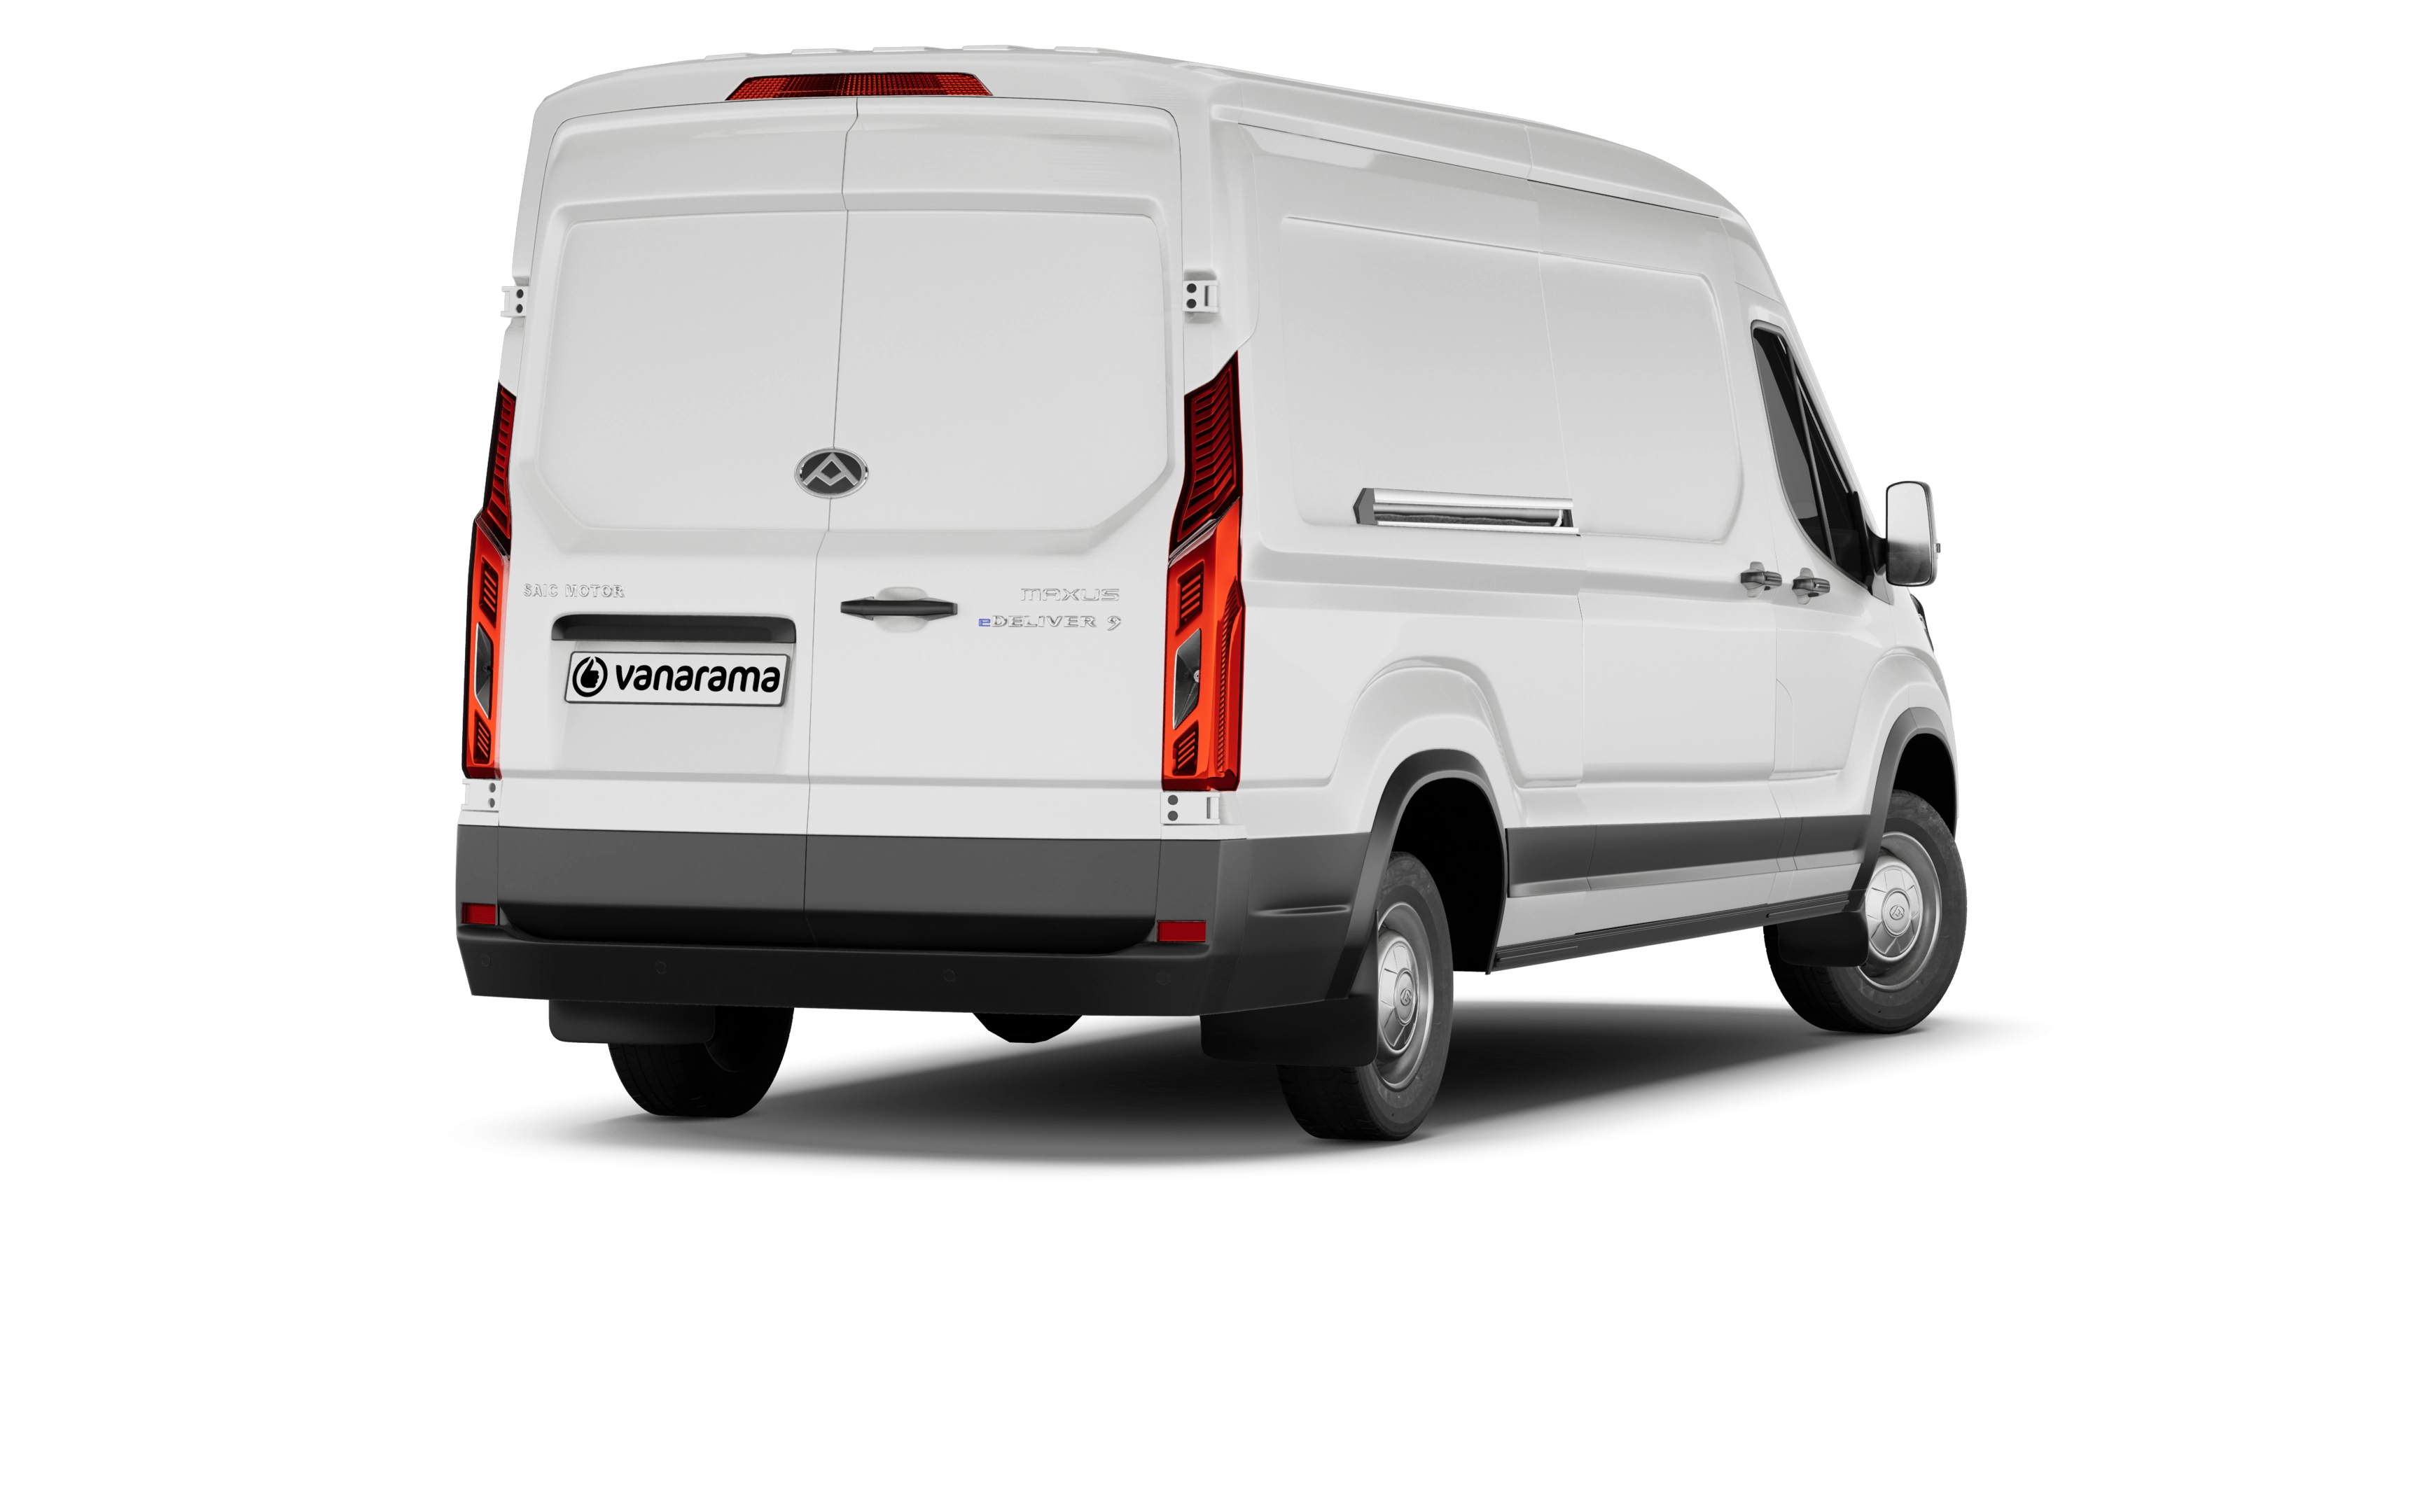 Maxus e deliver 9 lwb electric fwd 150kw high roof van 51.5kwh auto